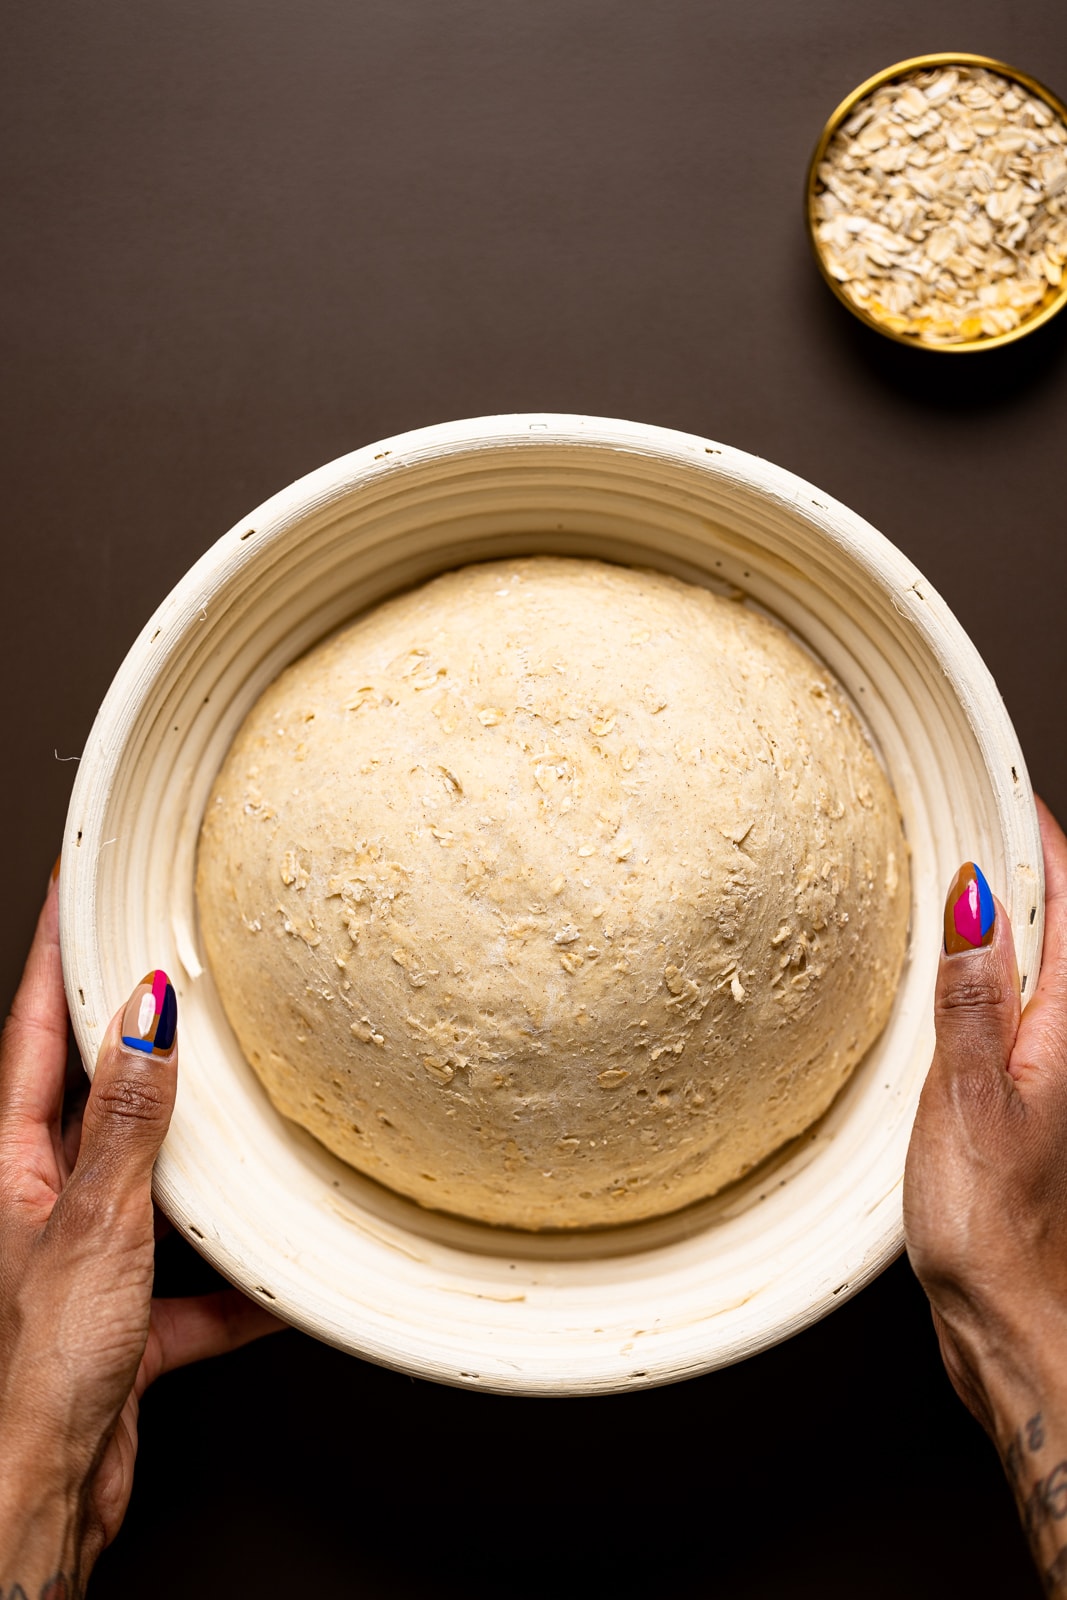 Risen bread dough in a bread proofing bowl being held on a brown table.